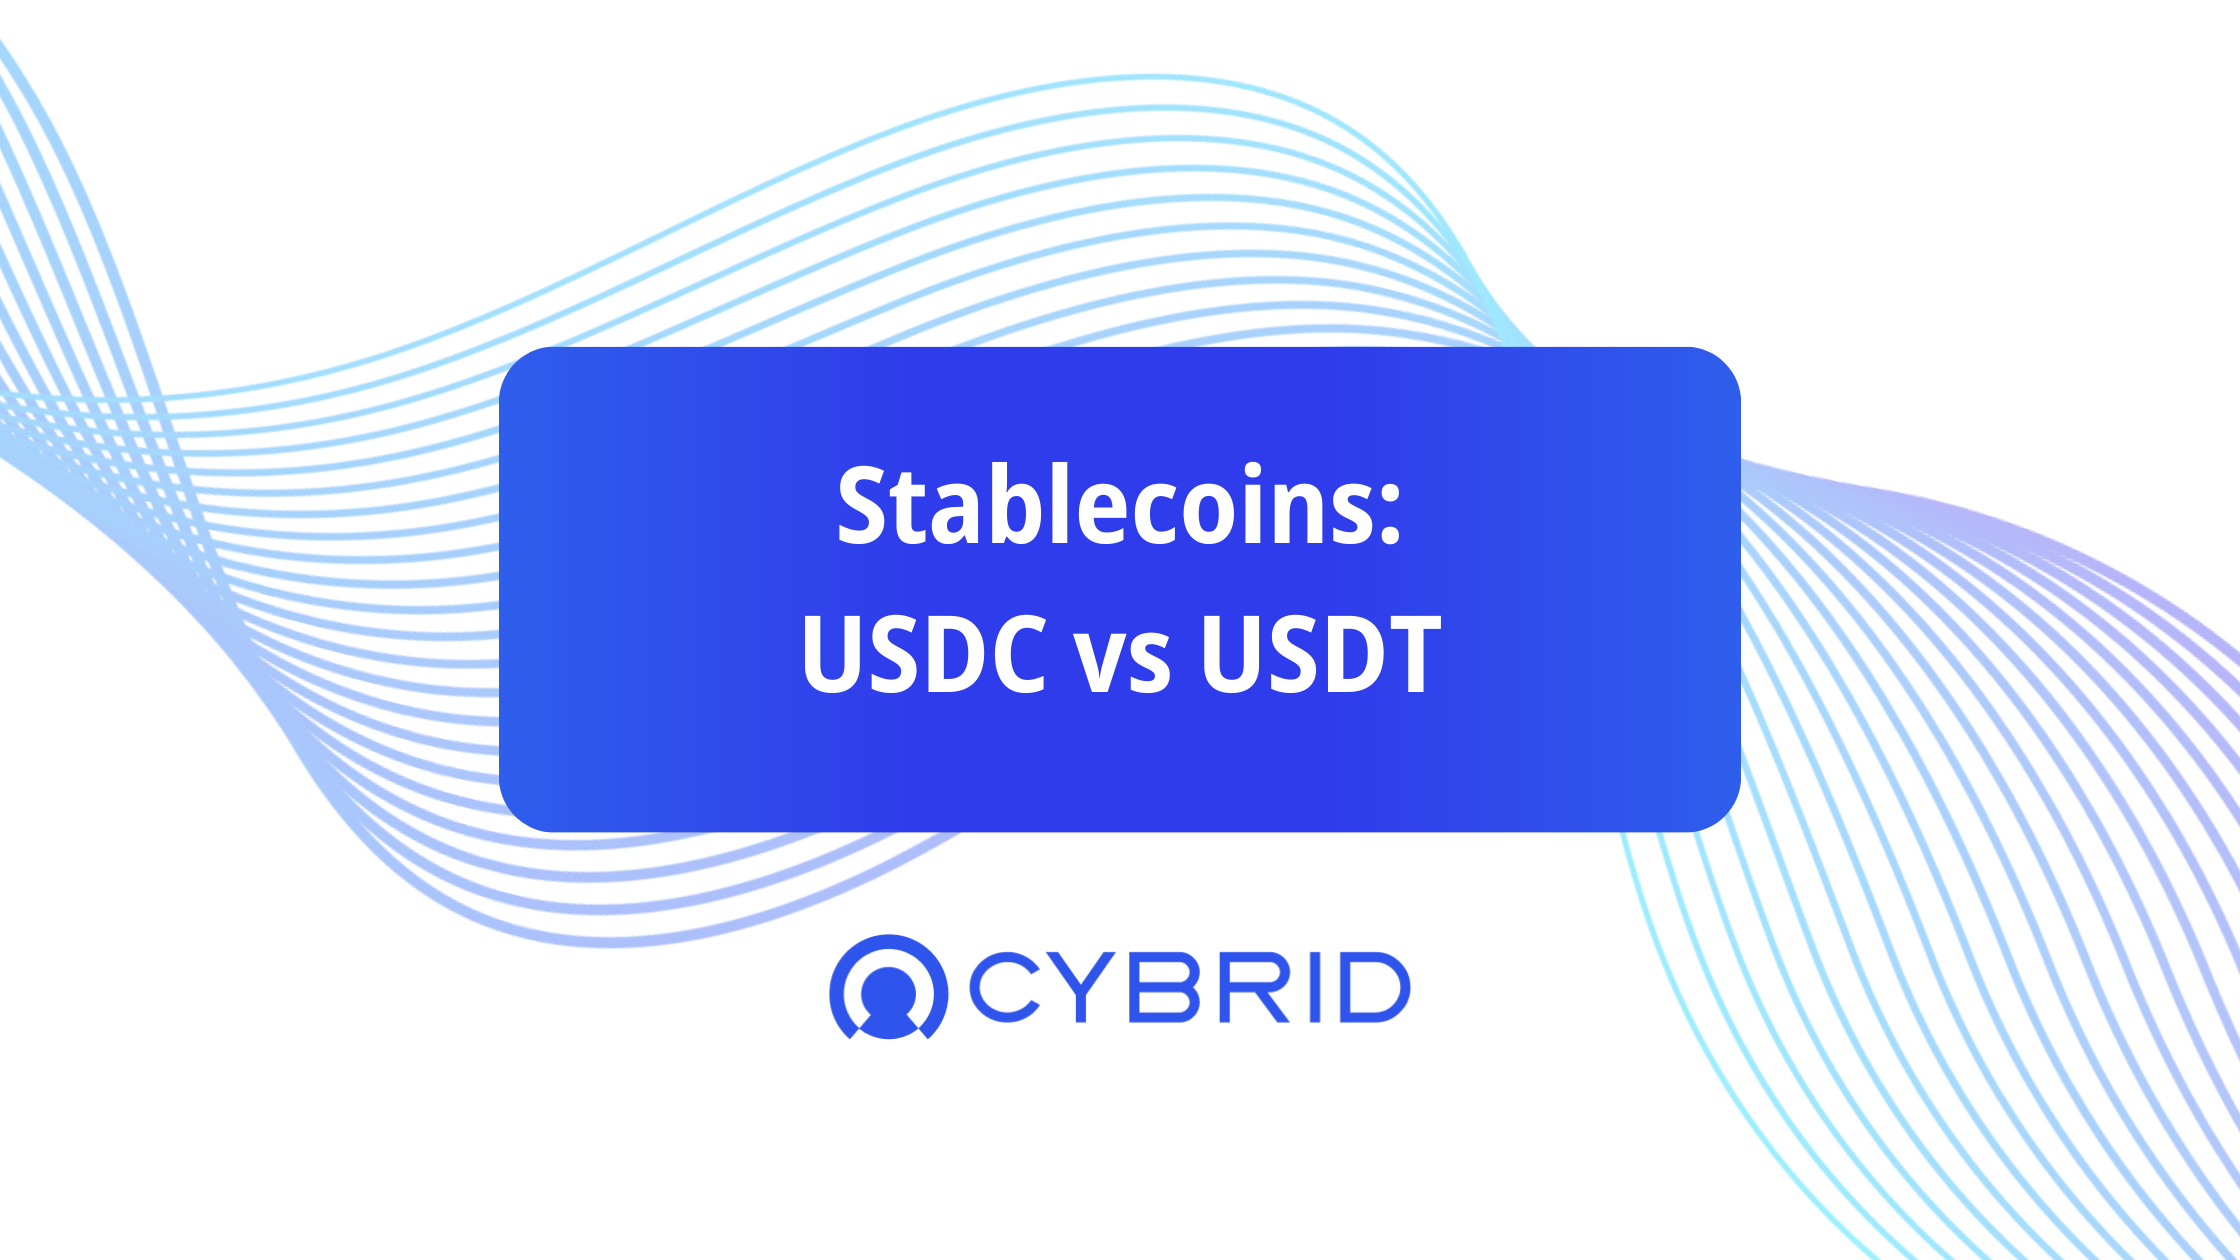 What's the difference between USDC vs USDT?